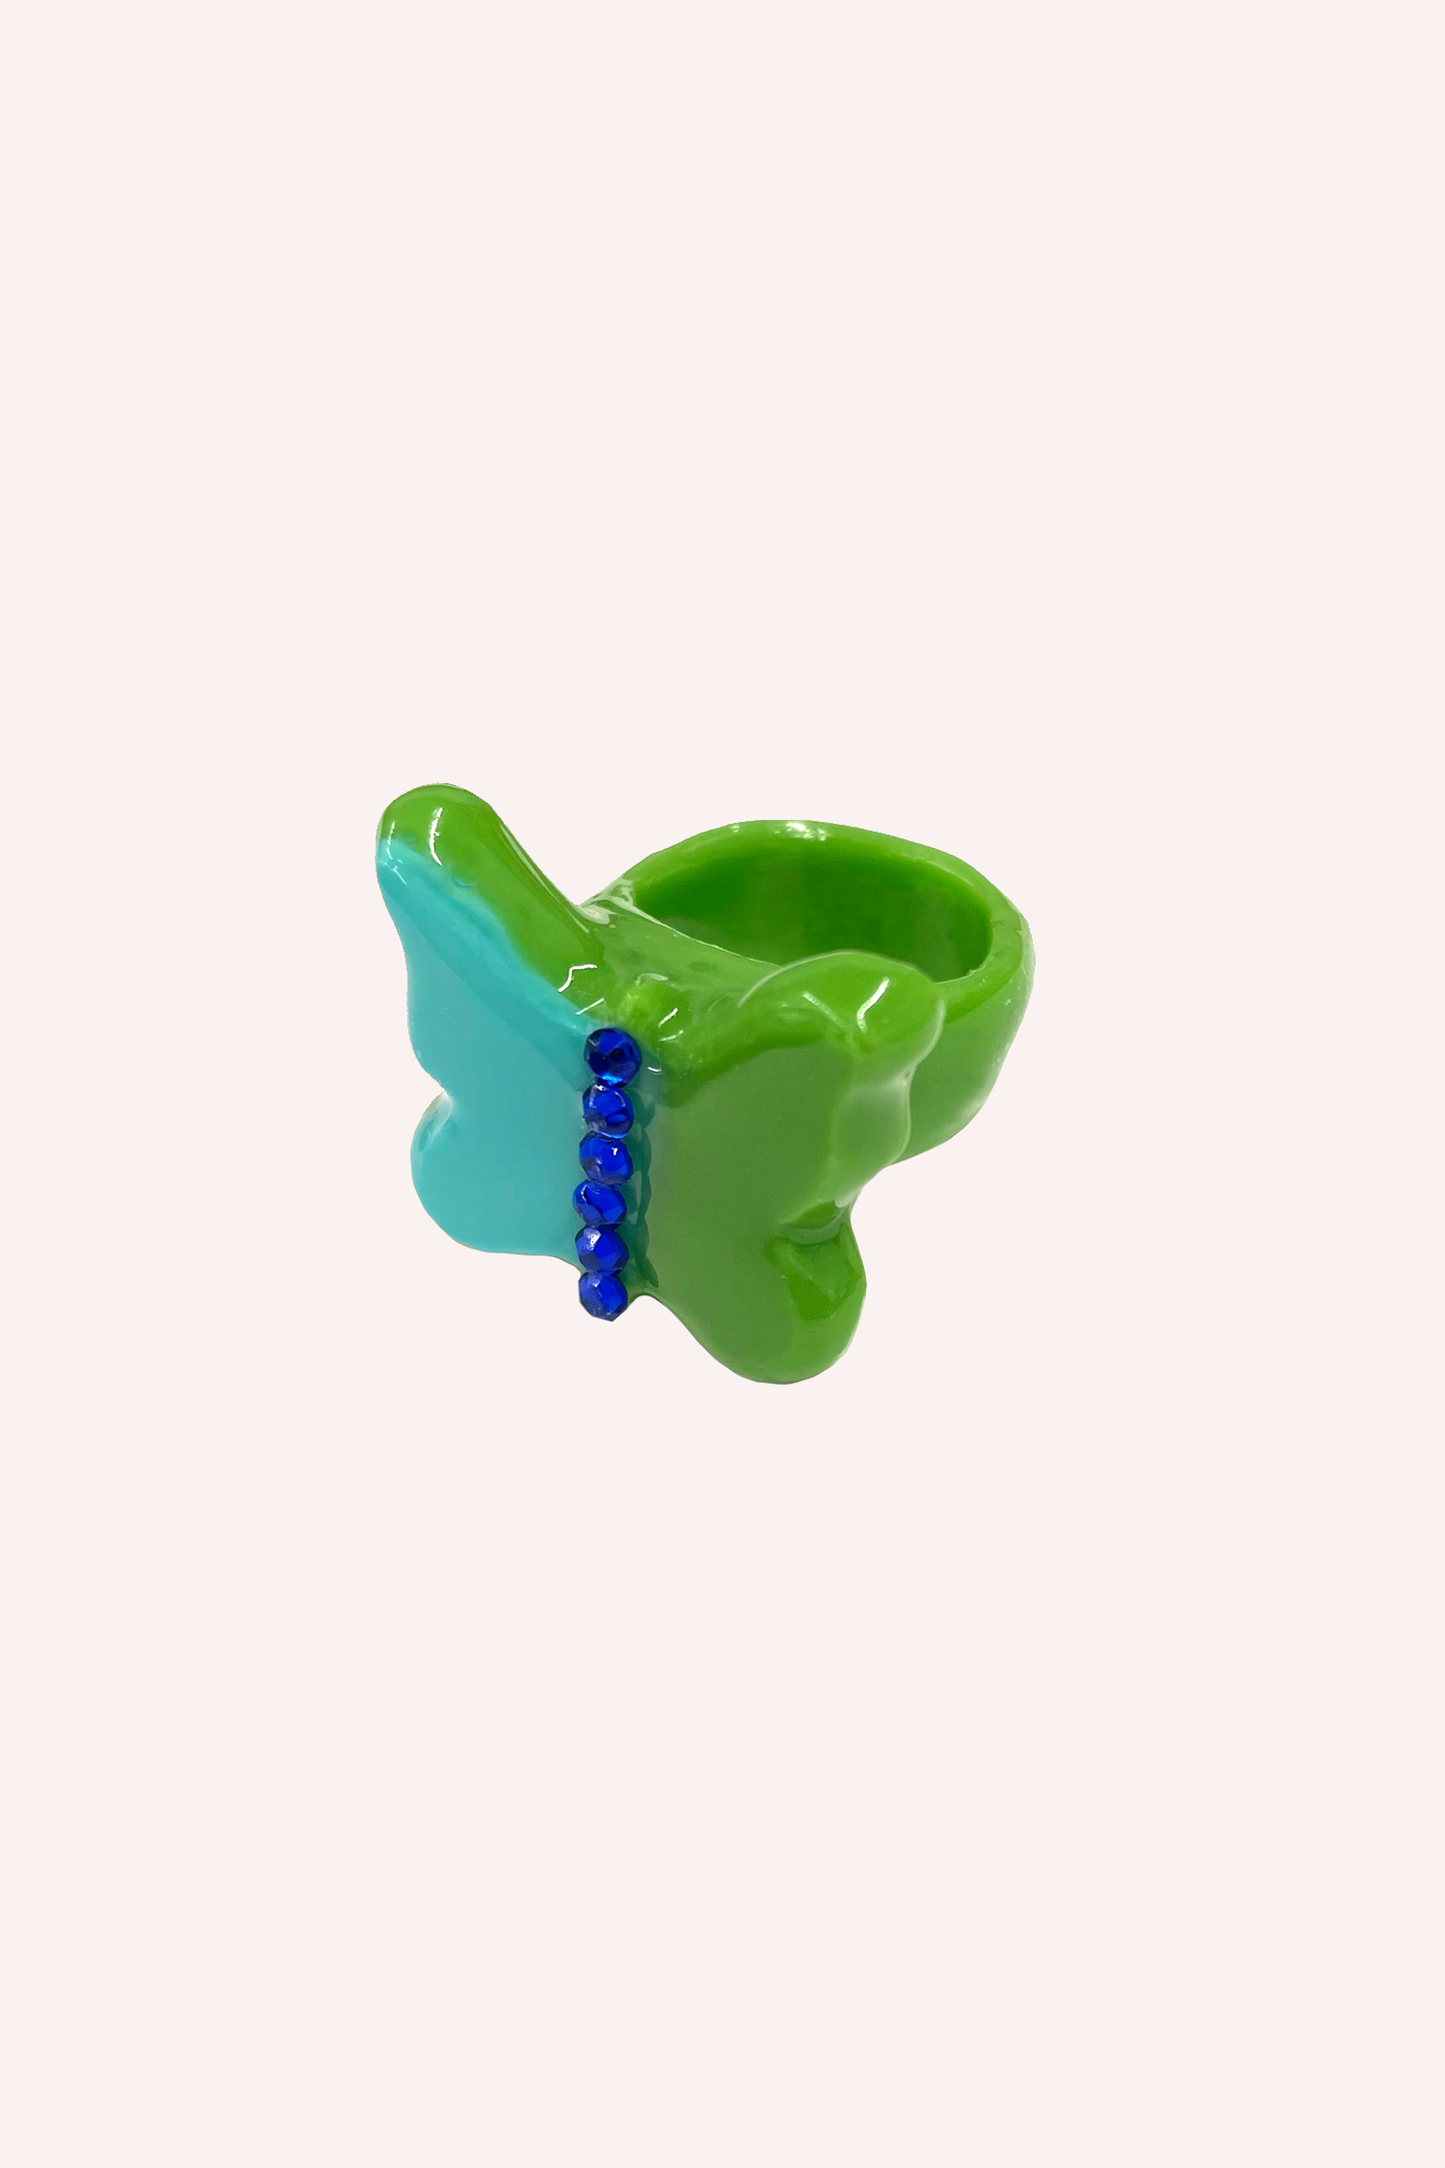 Green ring has a wing slightly blue, with 6-rhinestone that make the body shine in dark blue